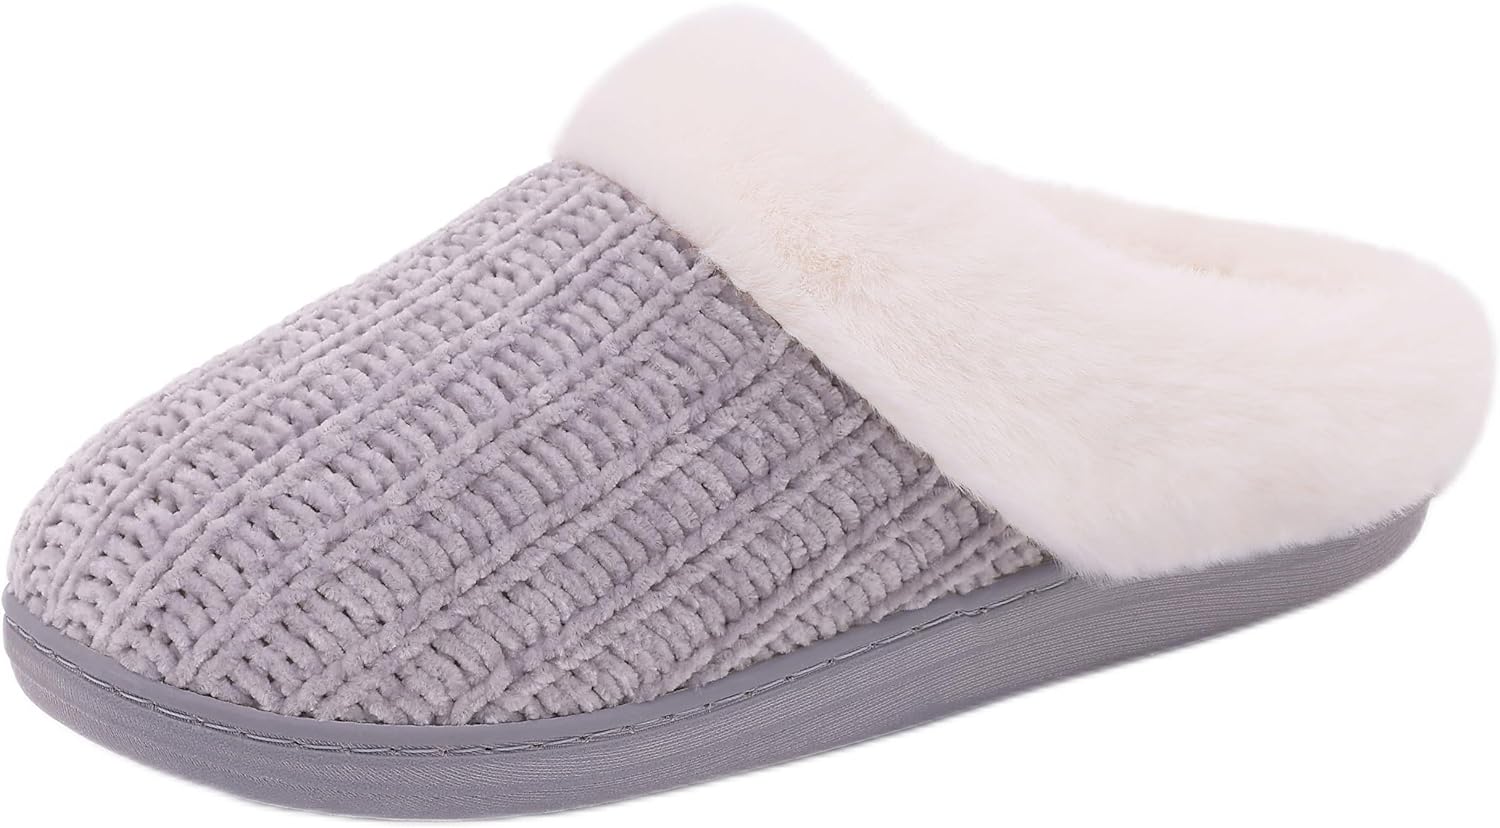  Evshine Warm Knit House Slippers for Women Comfy Fleece Lined  Winter Slippers with Memory Foam and Indoor Outdoor Soles Grey, 36-37 (Size  5-6.5)